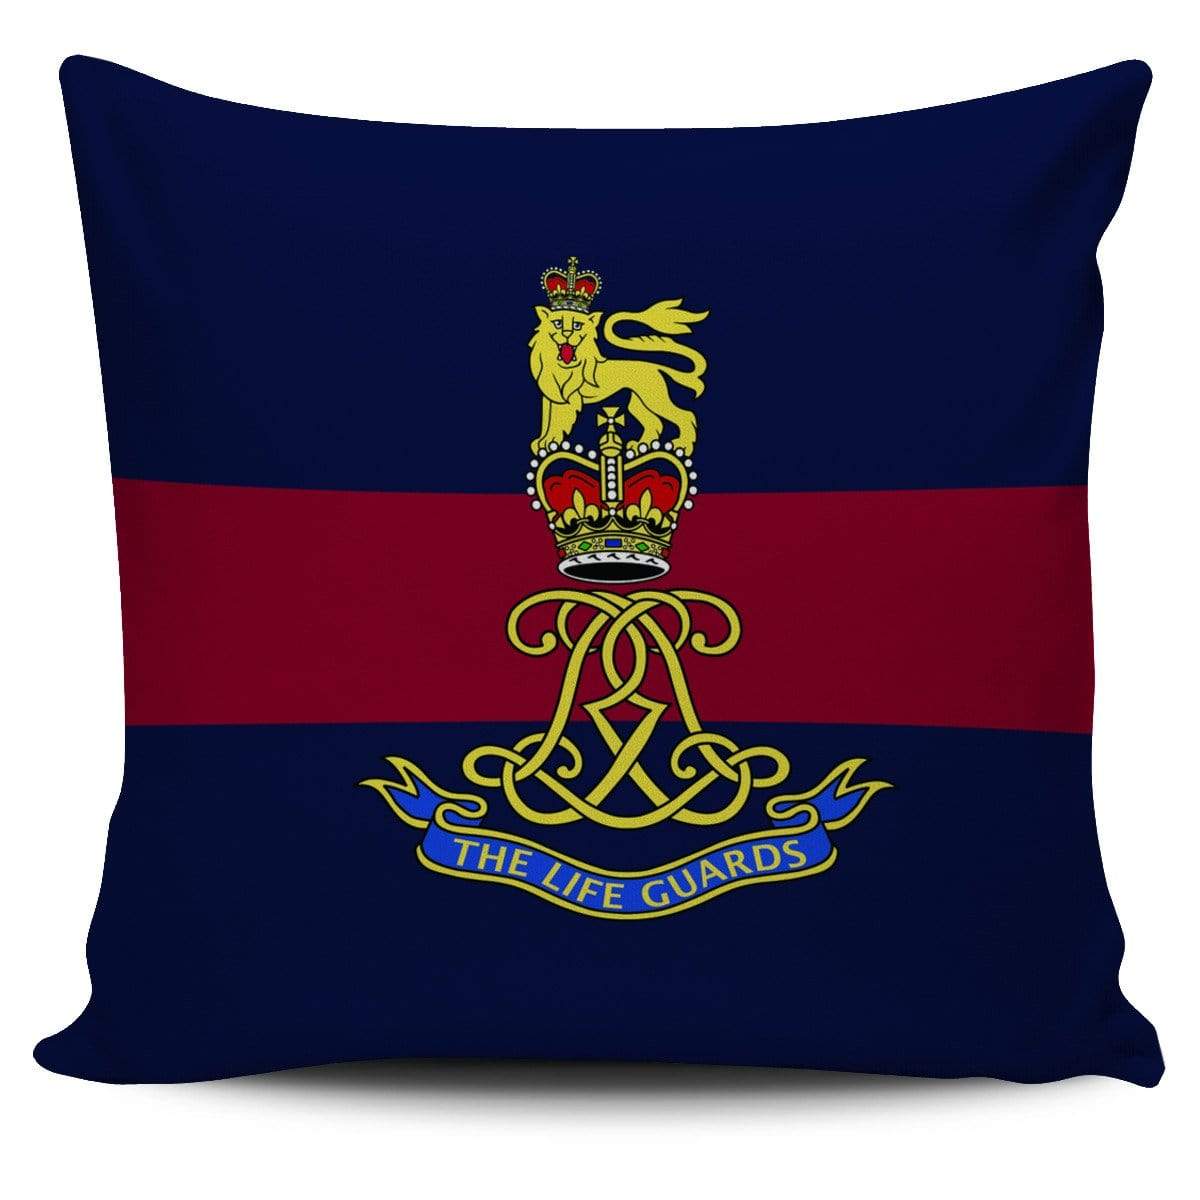 cushion cover The Life Guards The Life Guards Cushion Cover